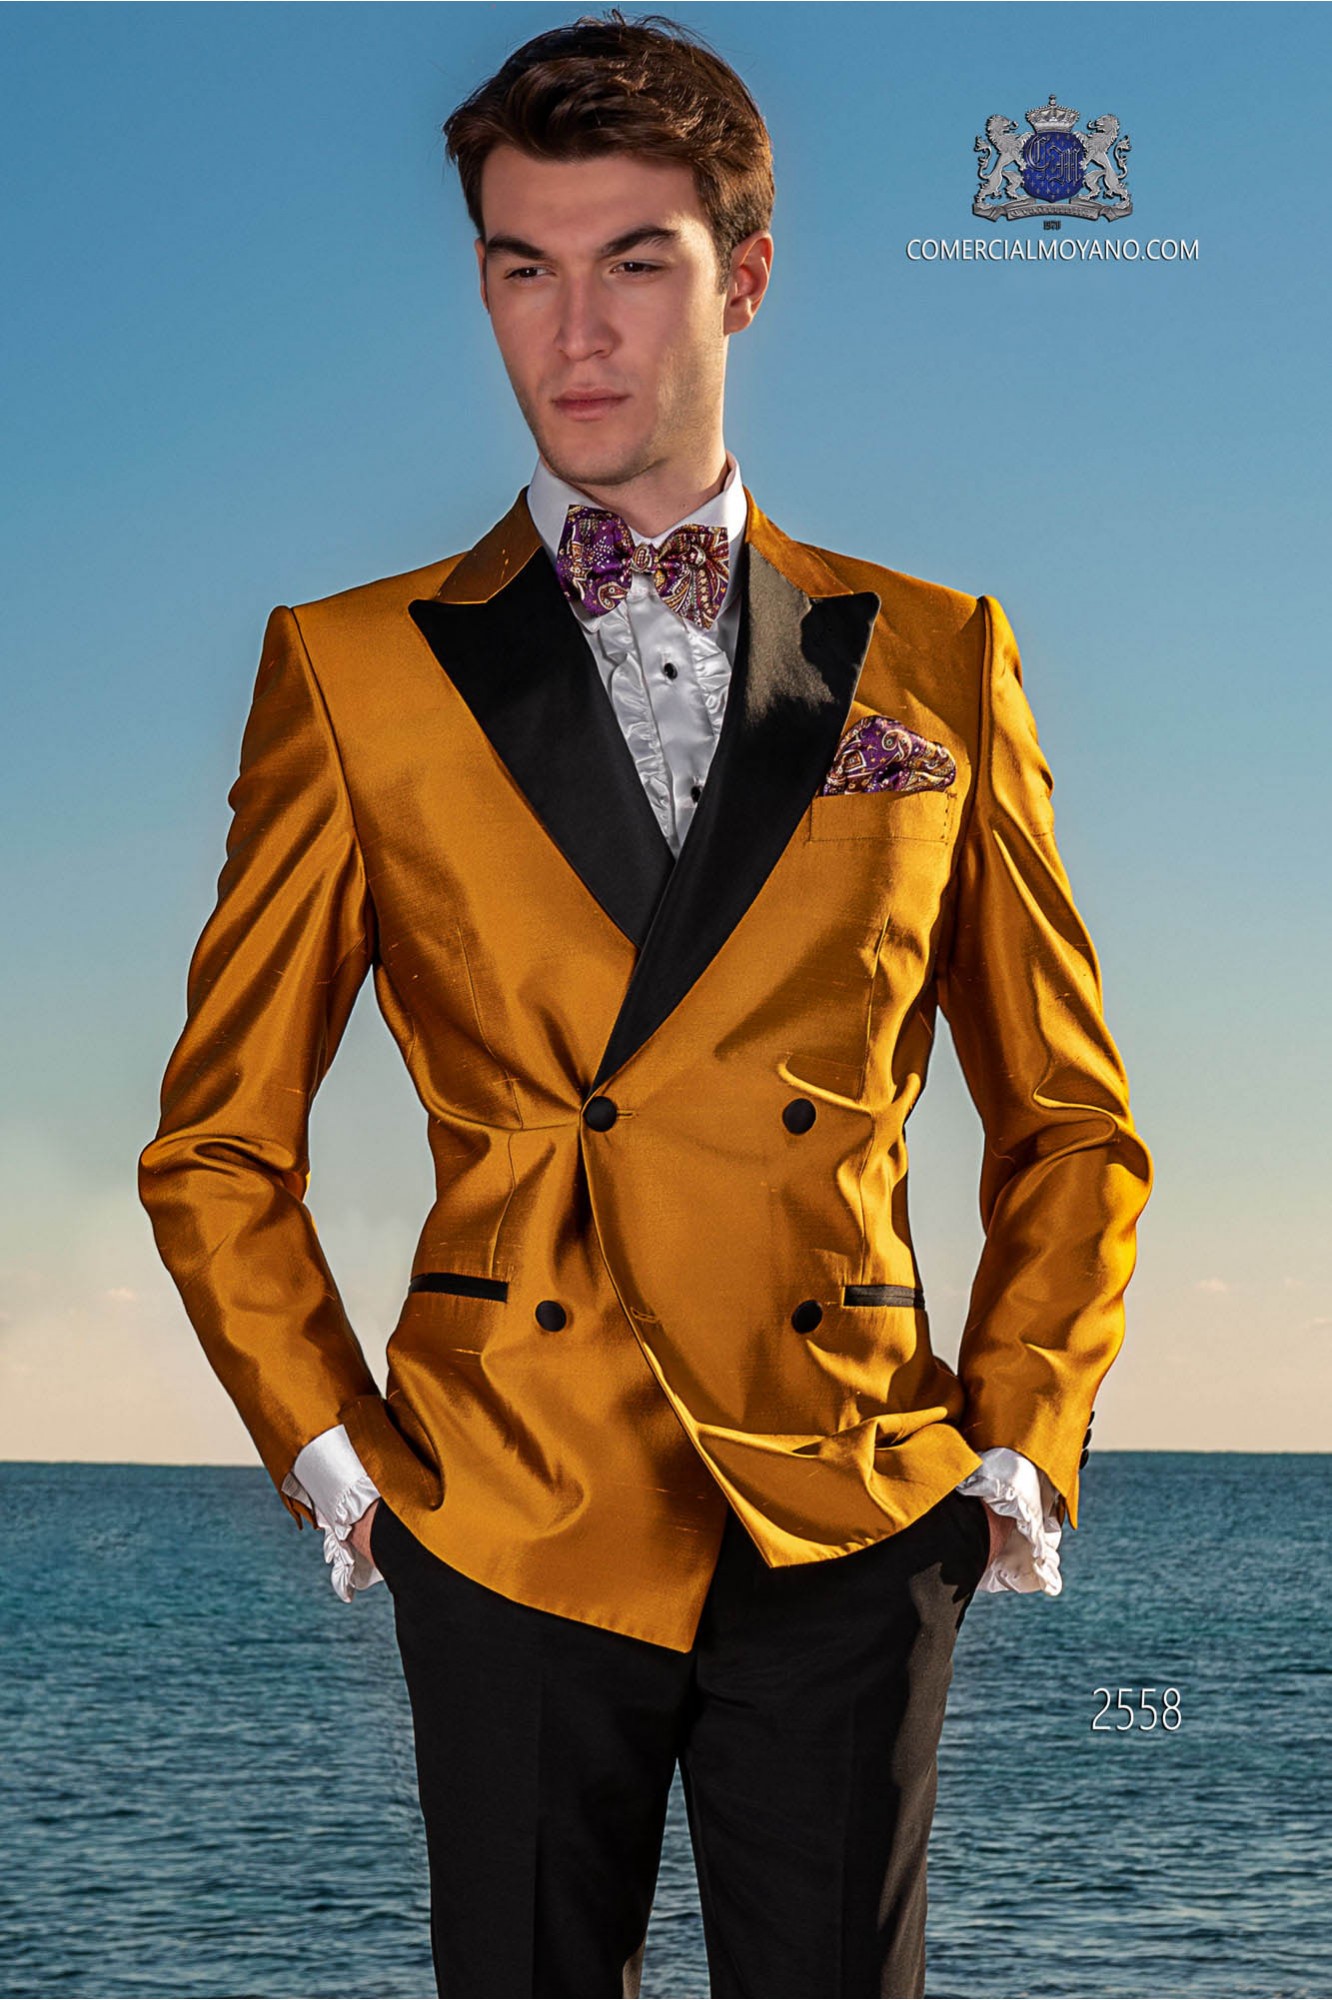 Tuxedo double breasted golden shantung with satin lapels. Peak lapels and 4 buttons. Shantung silk mix fabric. model 2558 Mario Moyano